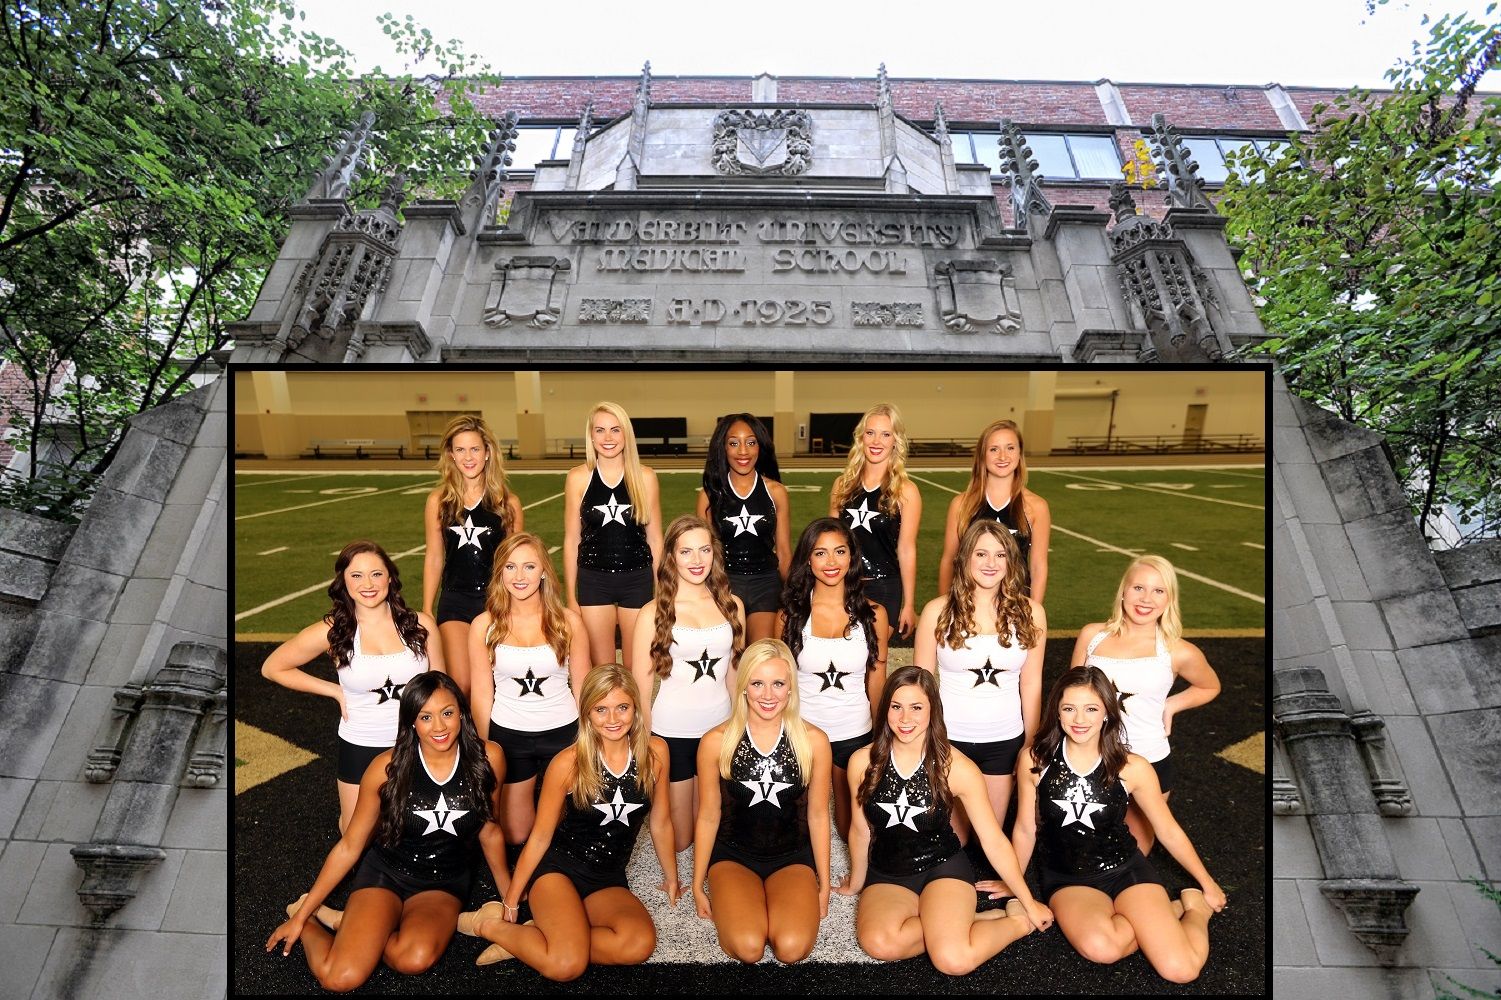 Brown university hot girls Top 10 American Colleges With The Hottest Female Students